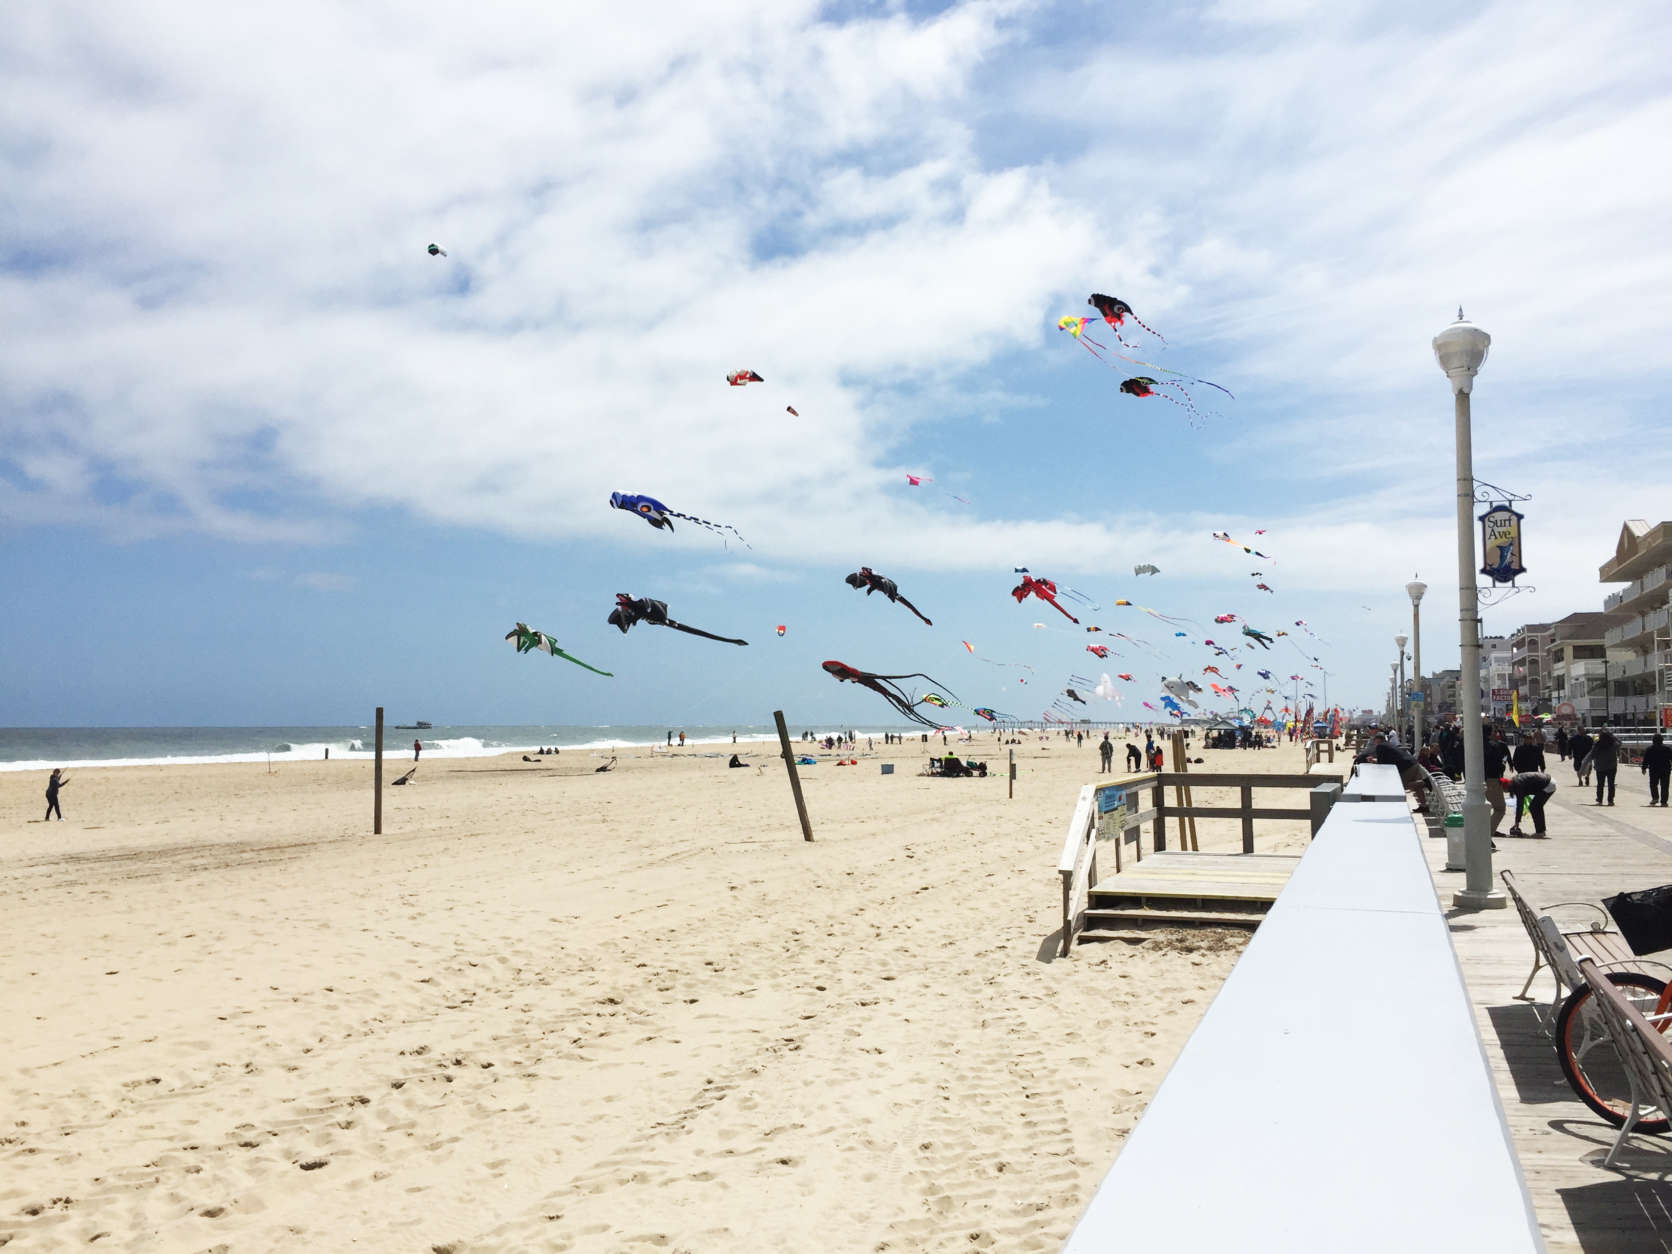 With its iconic boardwalk, family-friendly beaches and vibrant nightlife scene, Ocean City has become a go-to summer destination for Washingtonians. (WTOP/Mike McMearty)